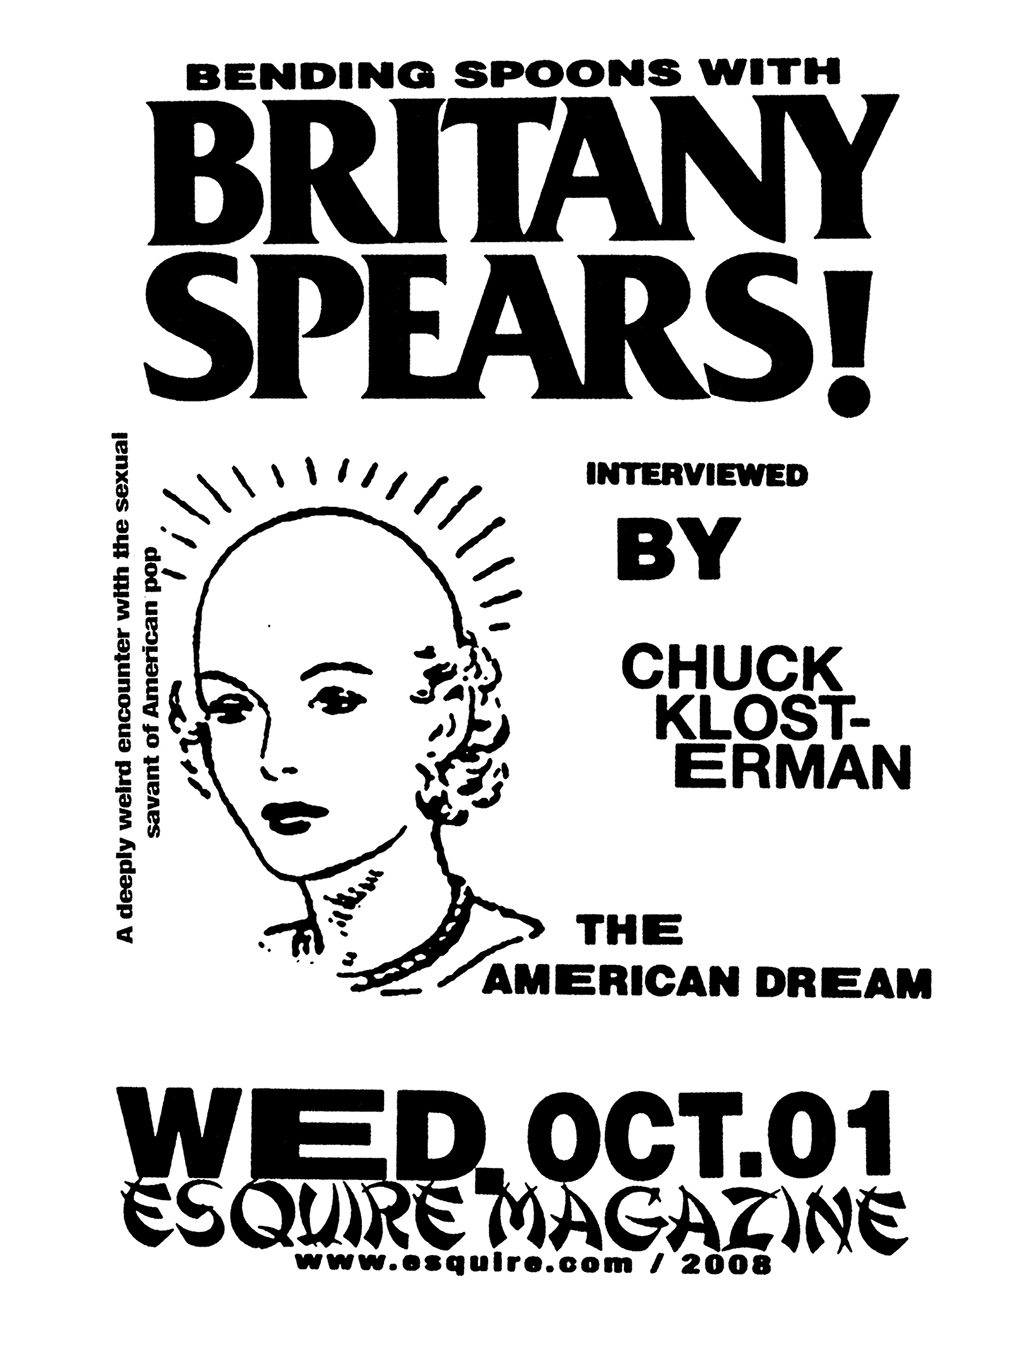 This was a project taking the inspiration of a Raymond Pettibon flyer (http://www.retardriot.com/store/wp-content/uploads/2013/01/1black_flag_zine.jpg) A recreating it purely digital and for an interview of Britney Spears by Chuck Klosterman.